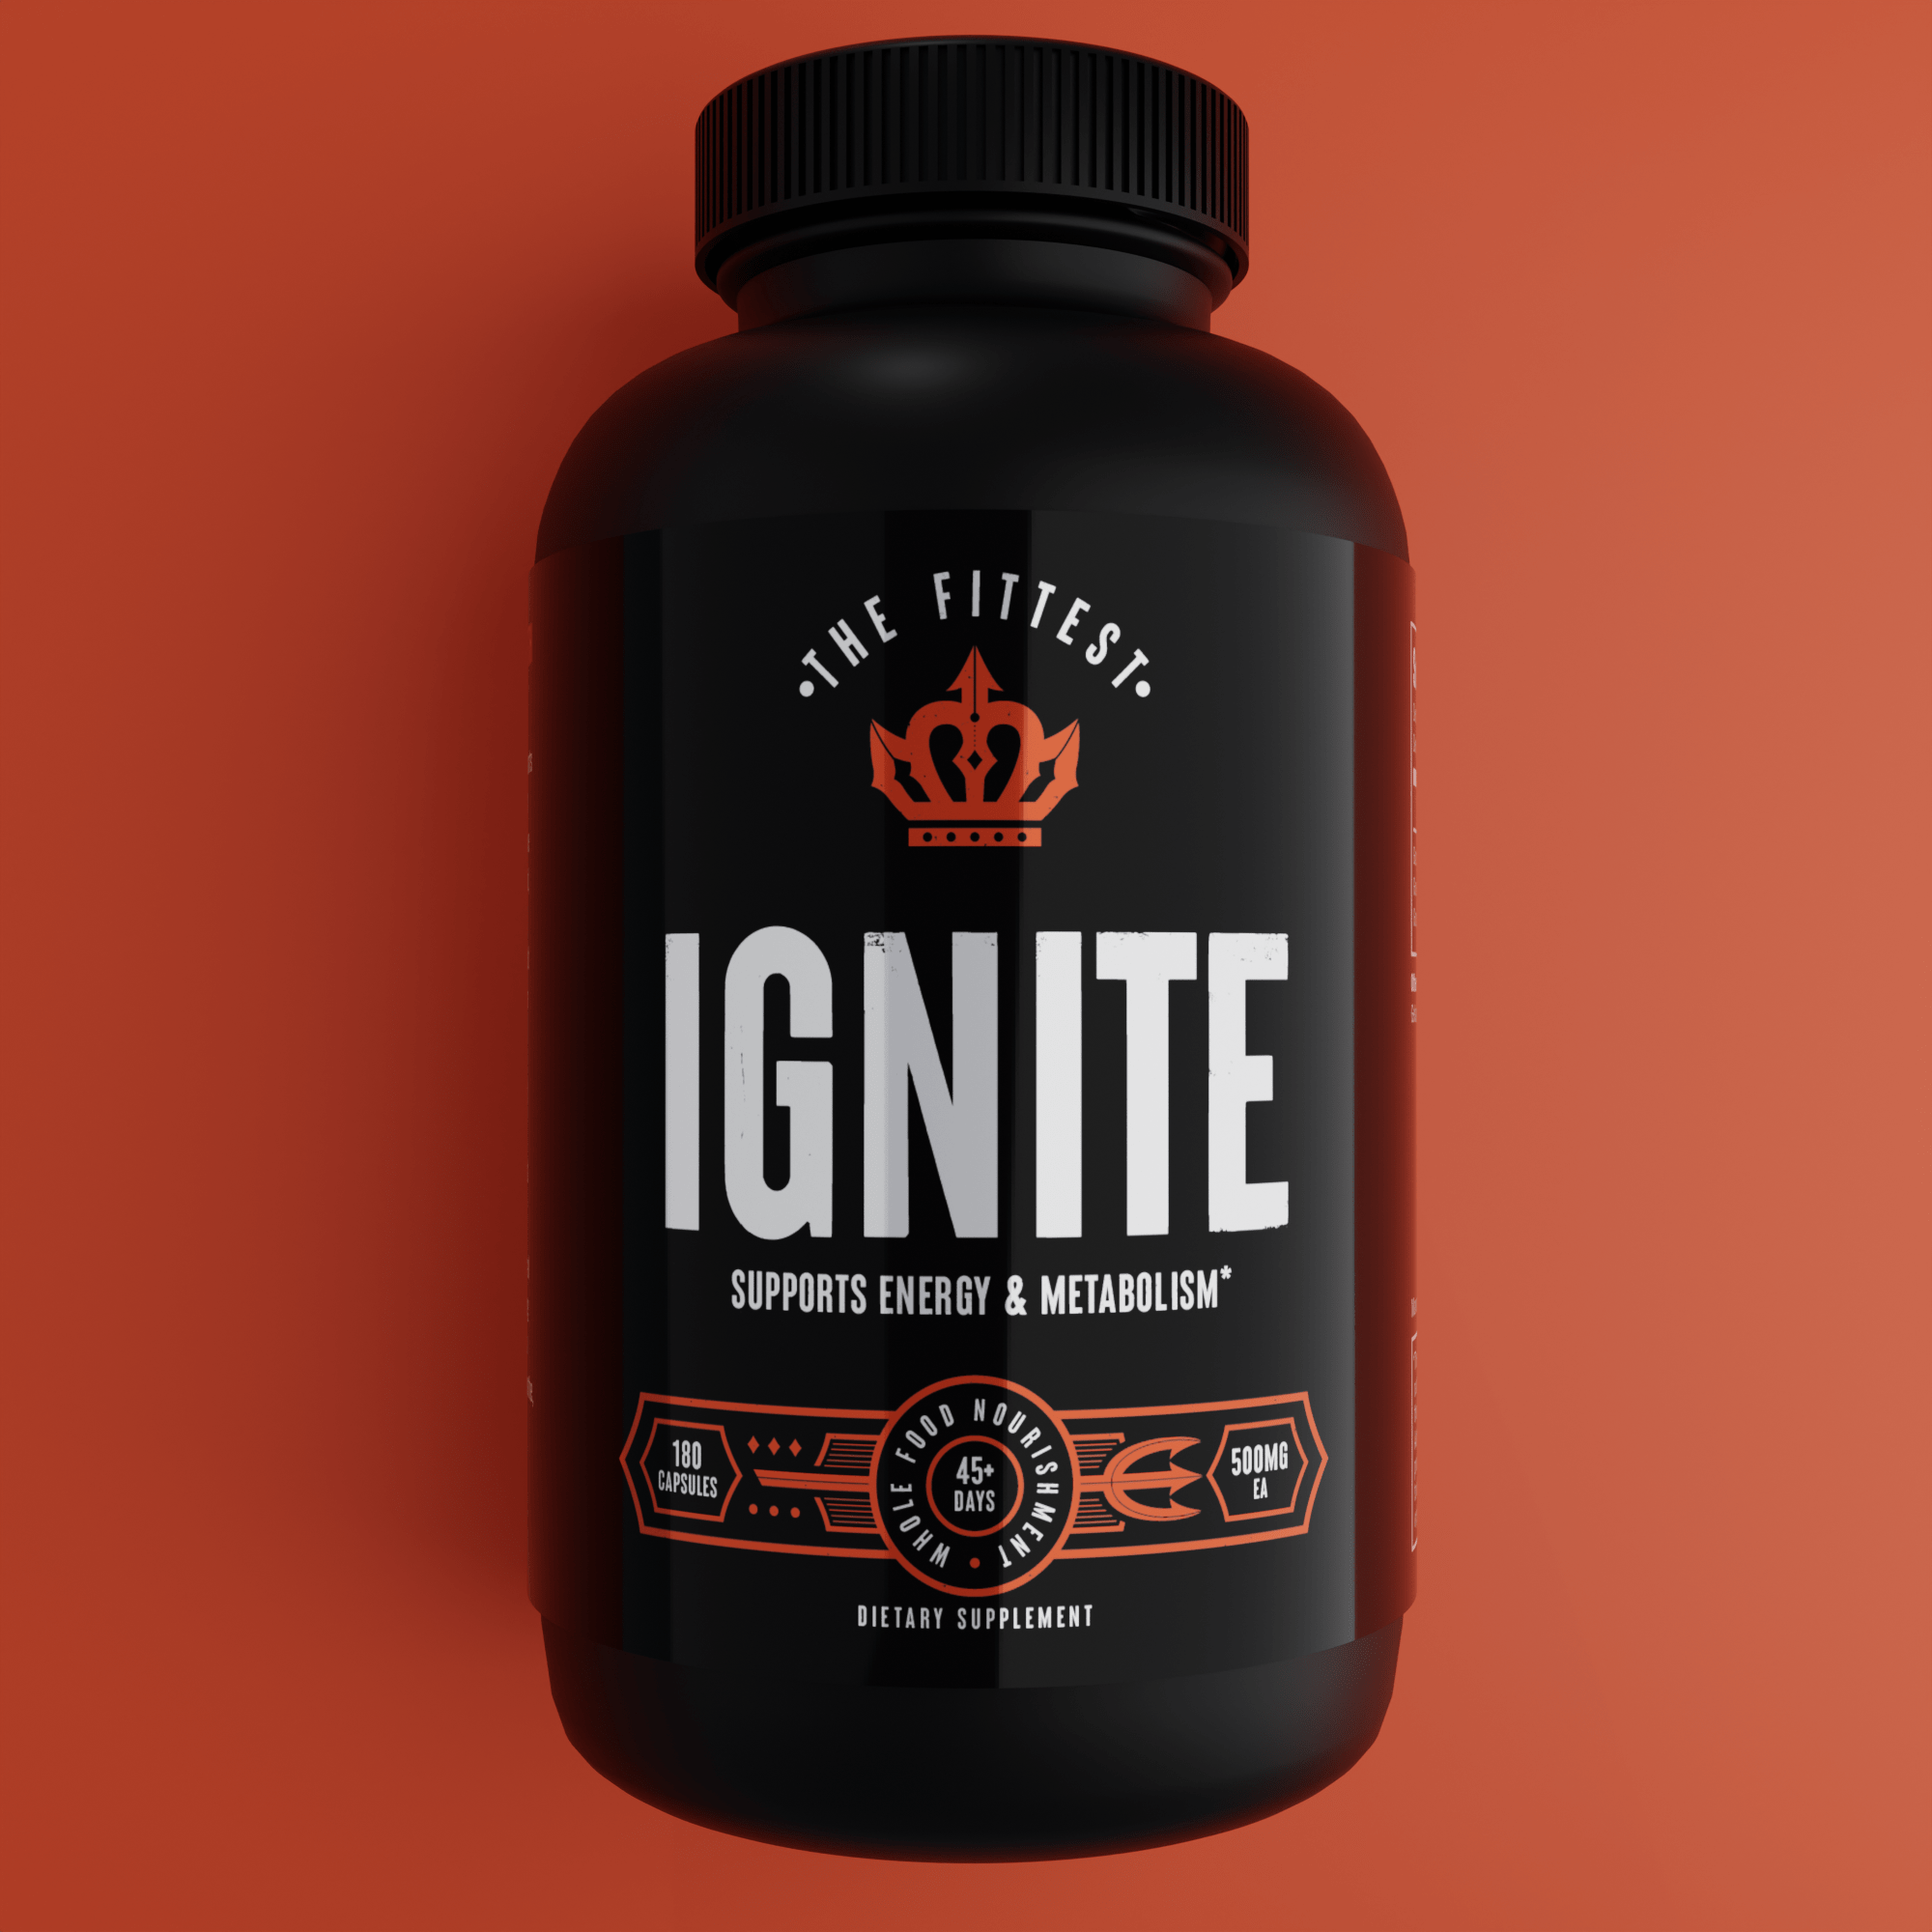 Bottle of Ignite showing the front label in front of a bright red-orange background